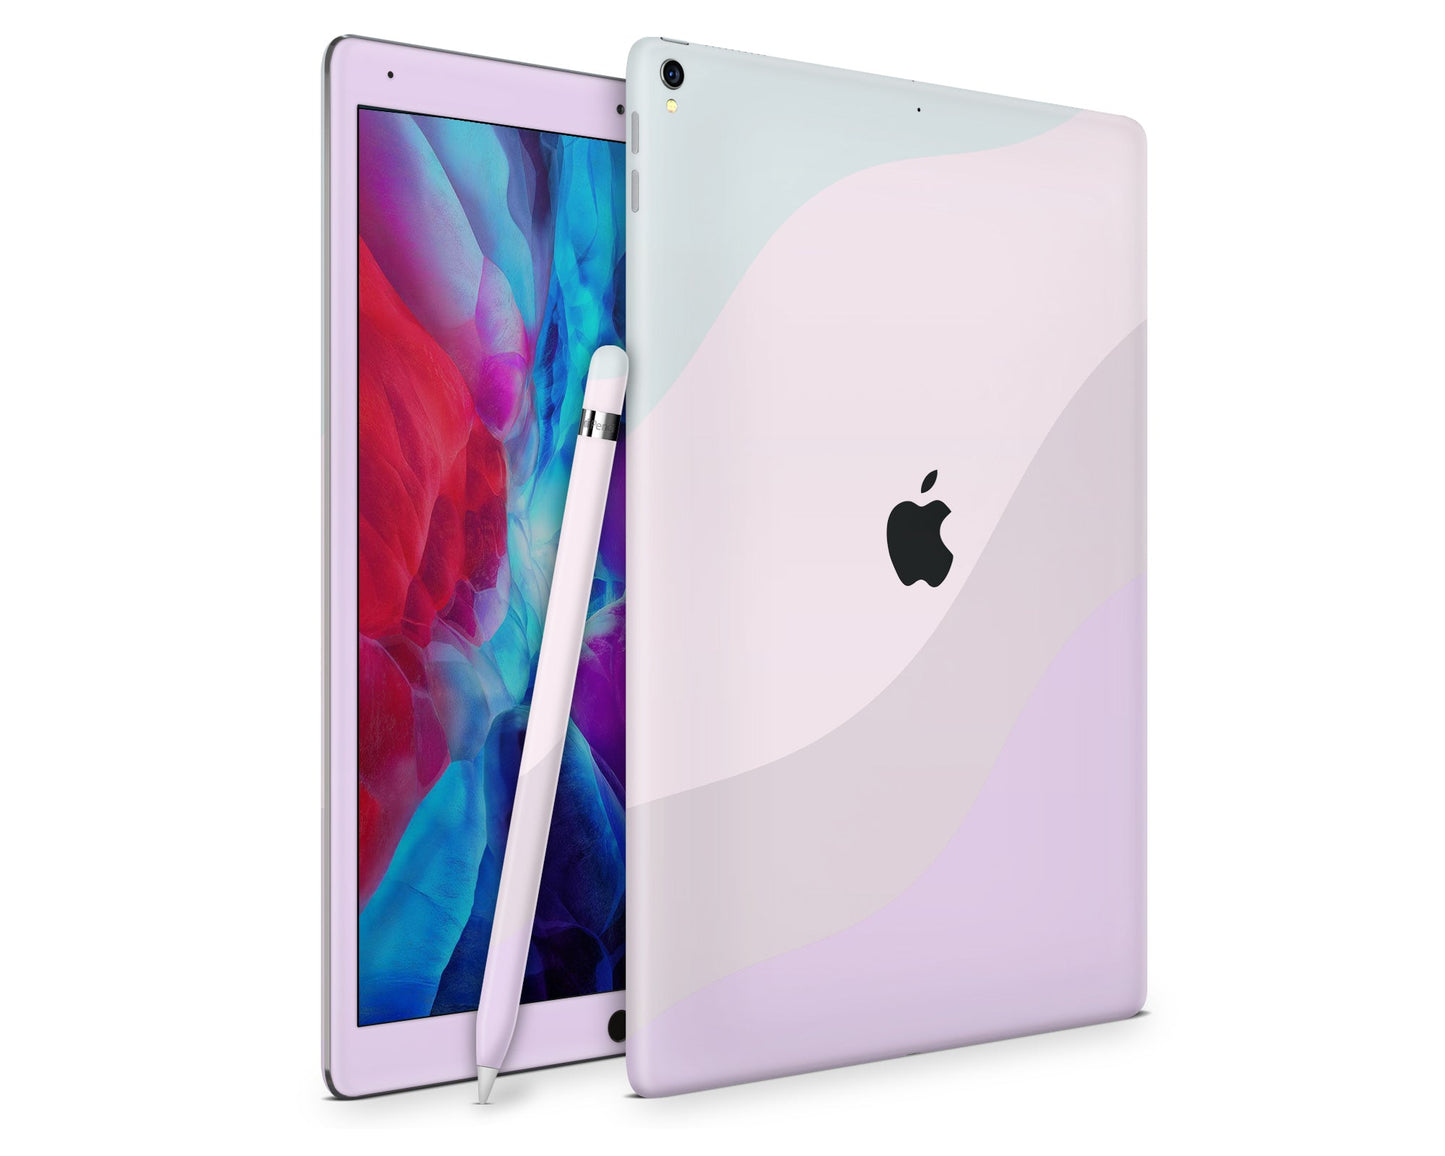 Lux Skins iPad Pastel Cotton Candy iPad Pro 12.9" Gen 5 Skins - Solid Colours Colour Blocking Skin